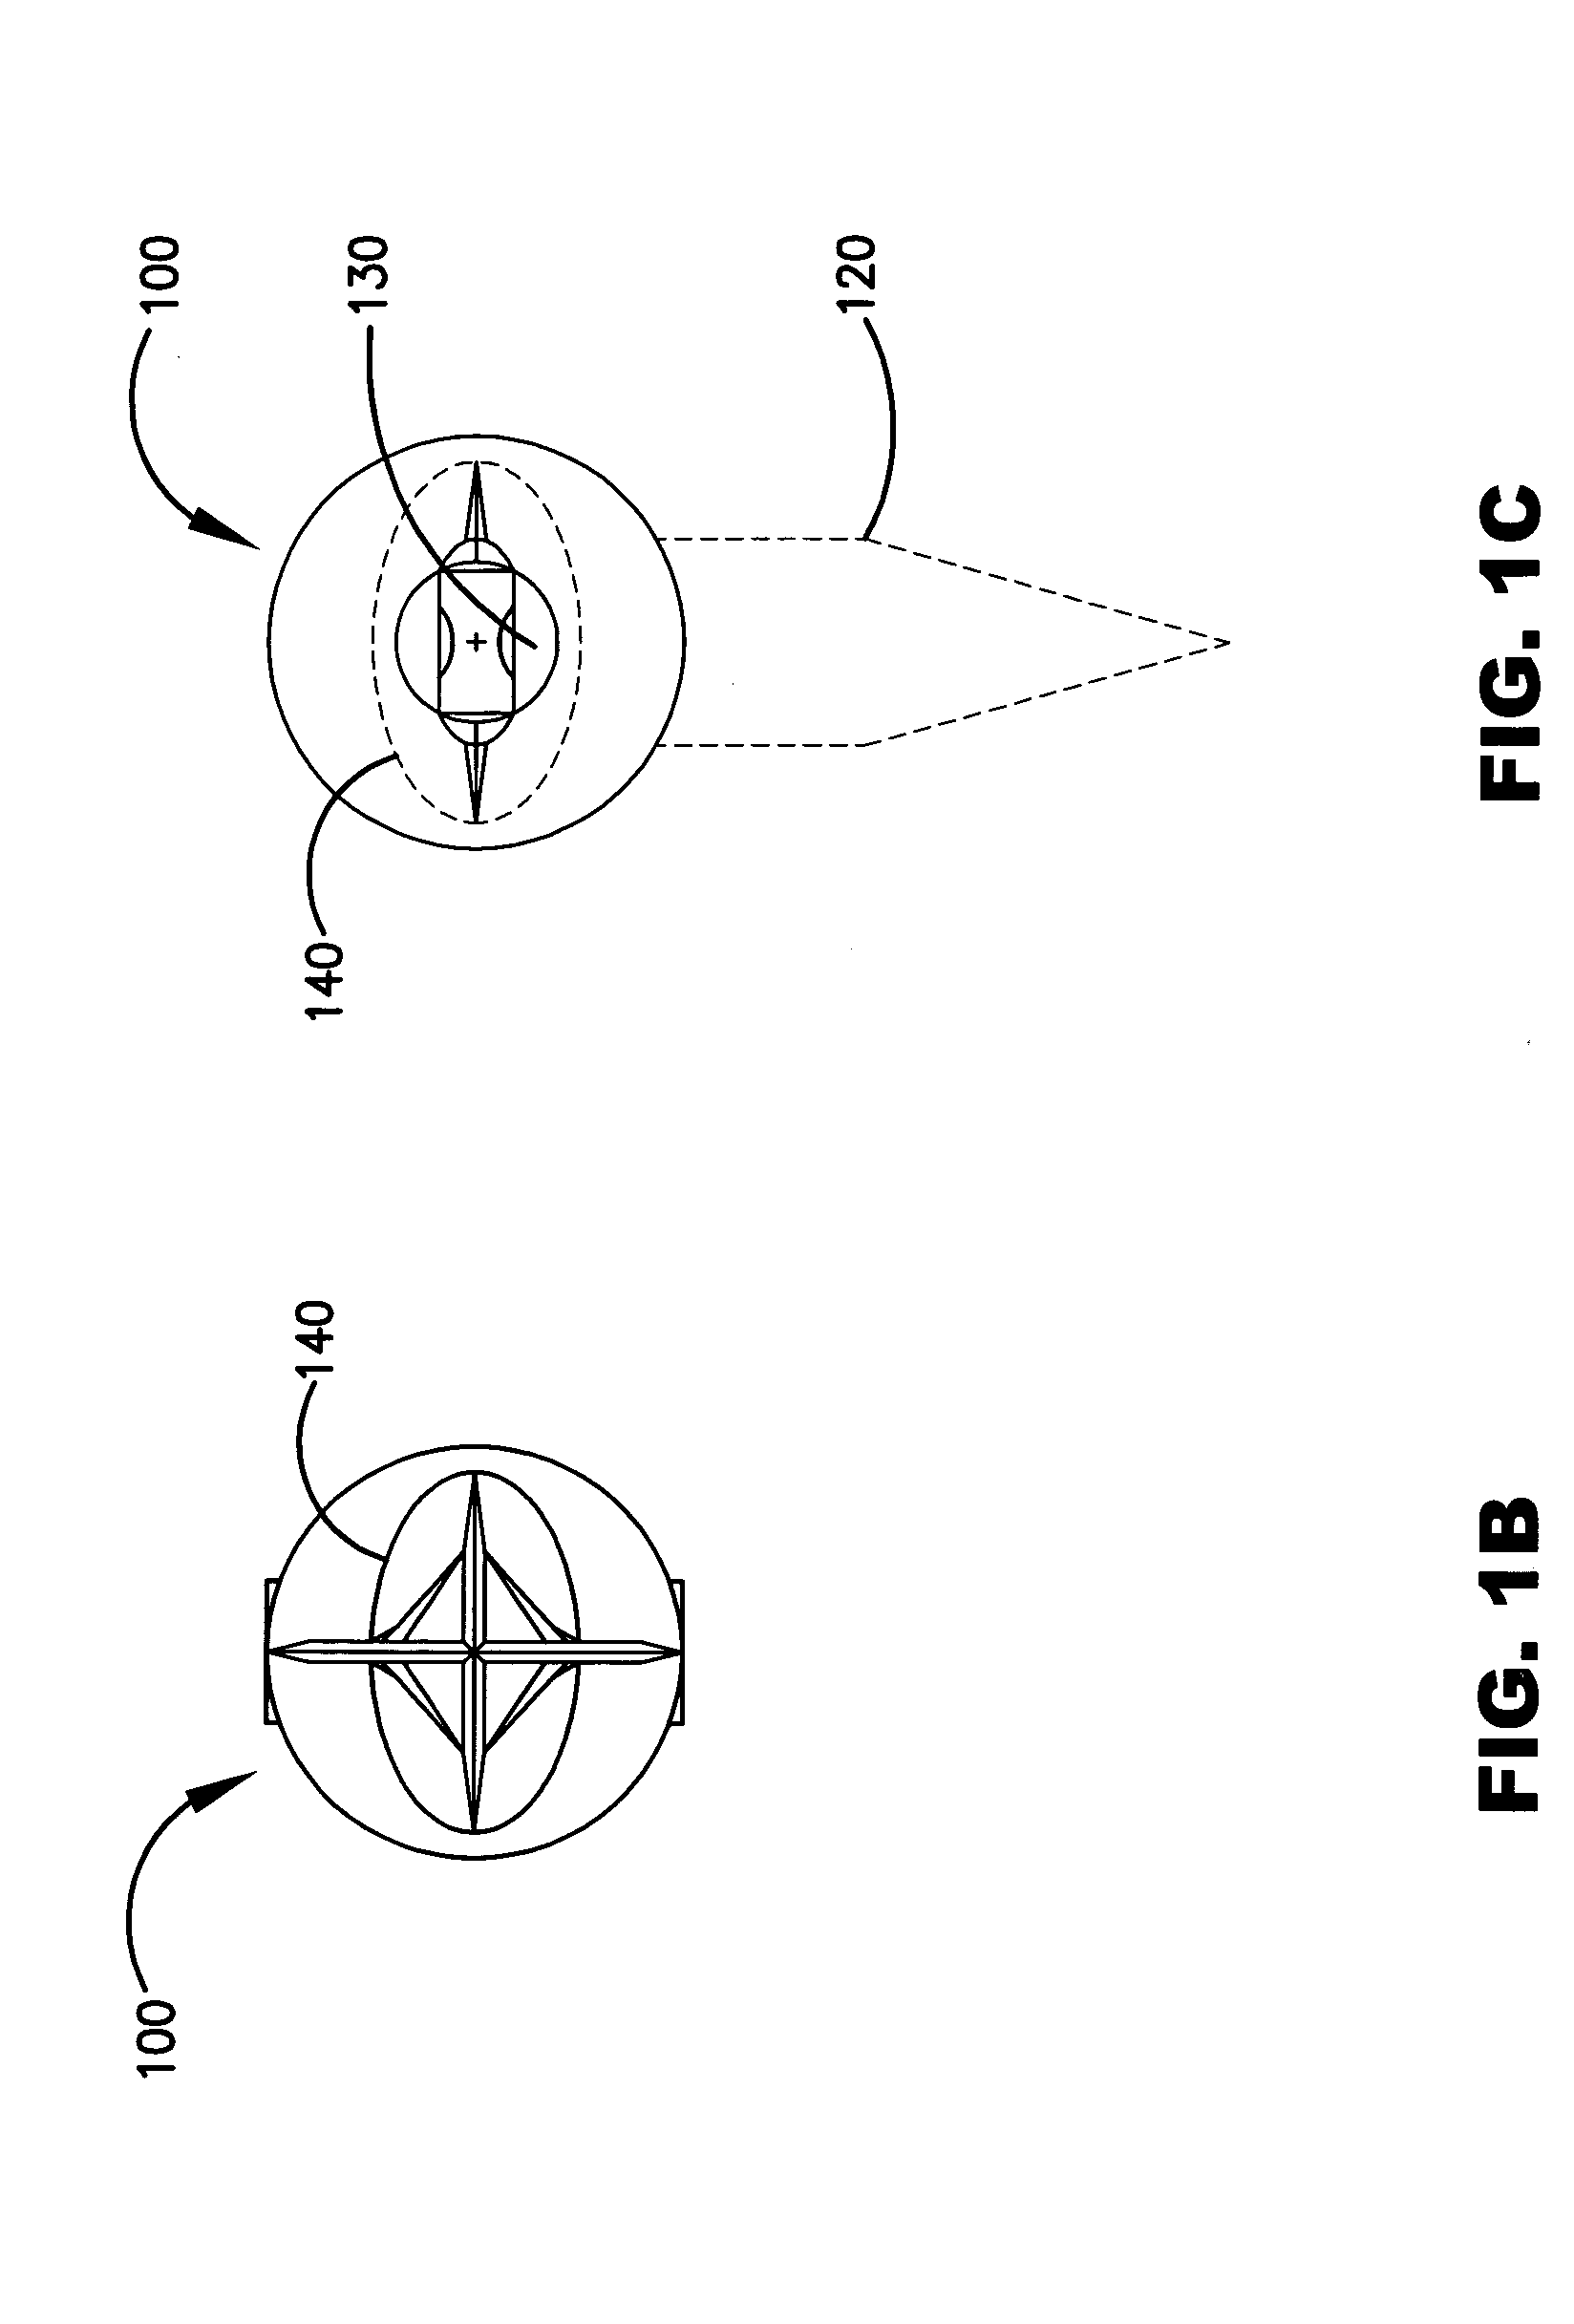 Wall and ceiling fastening system and methods therefor